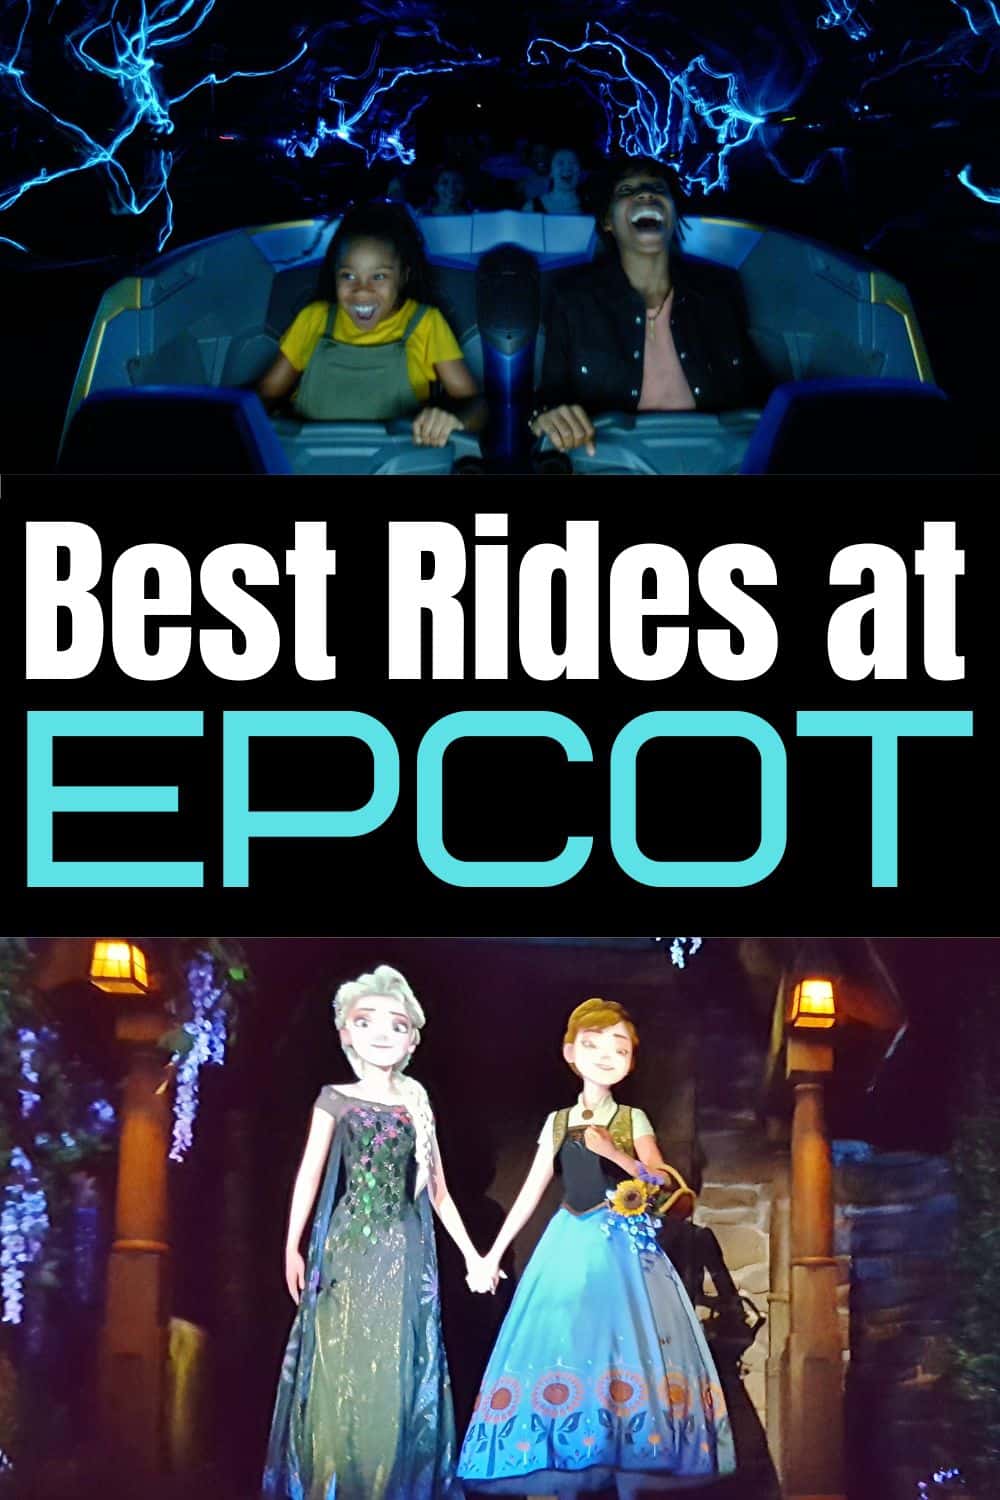 Best Rides at EPCOT